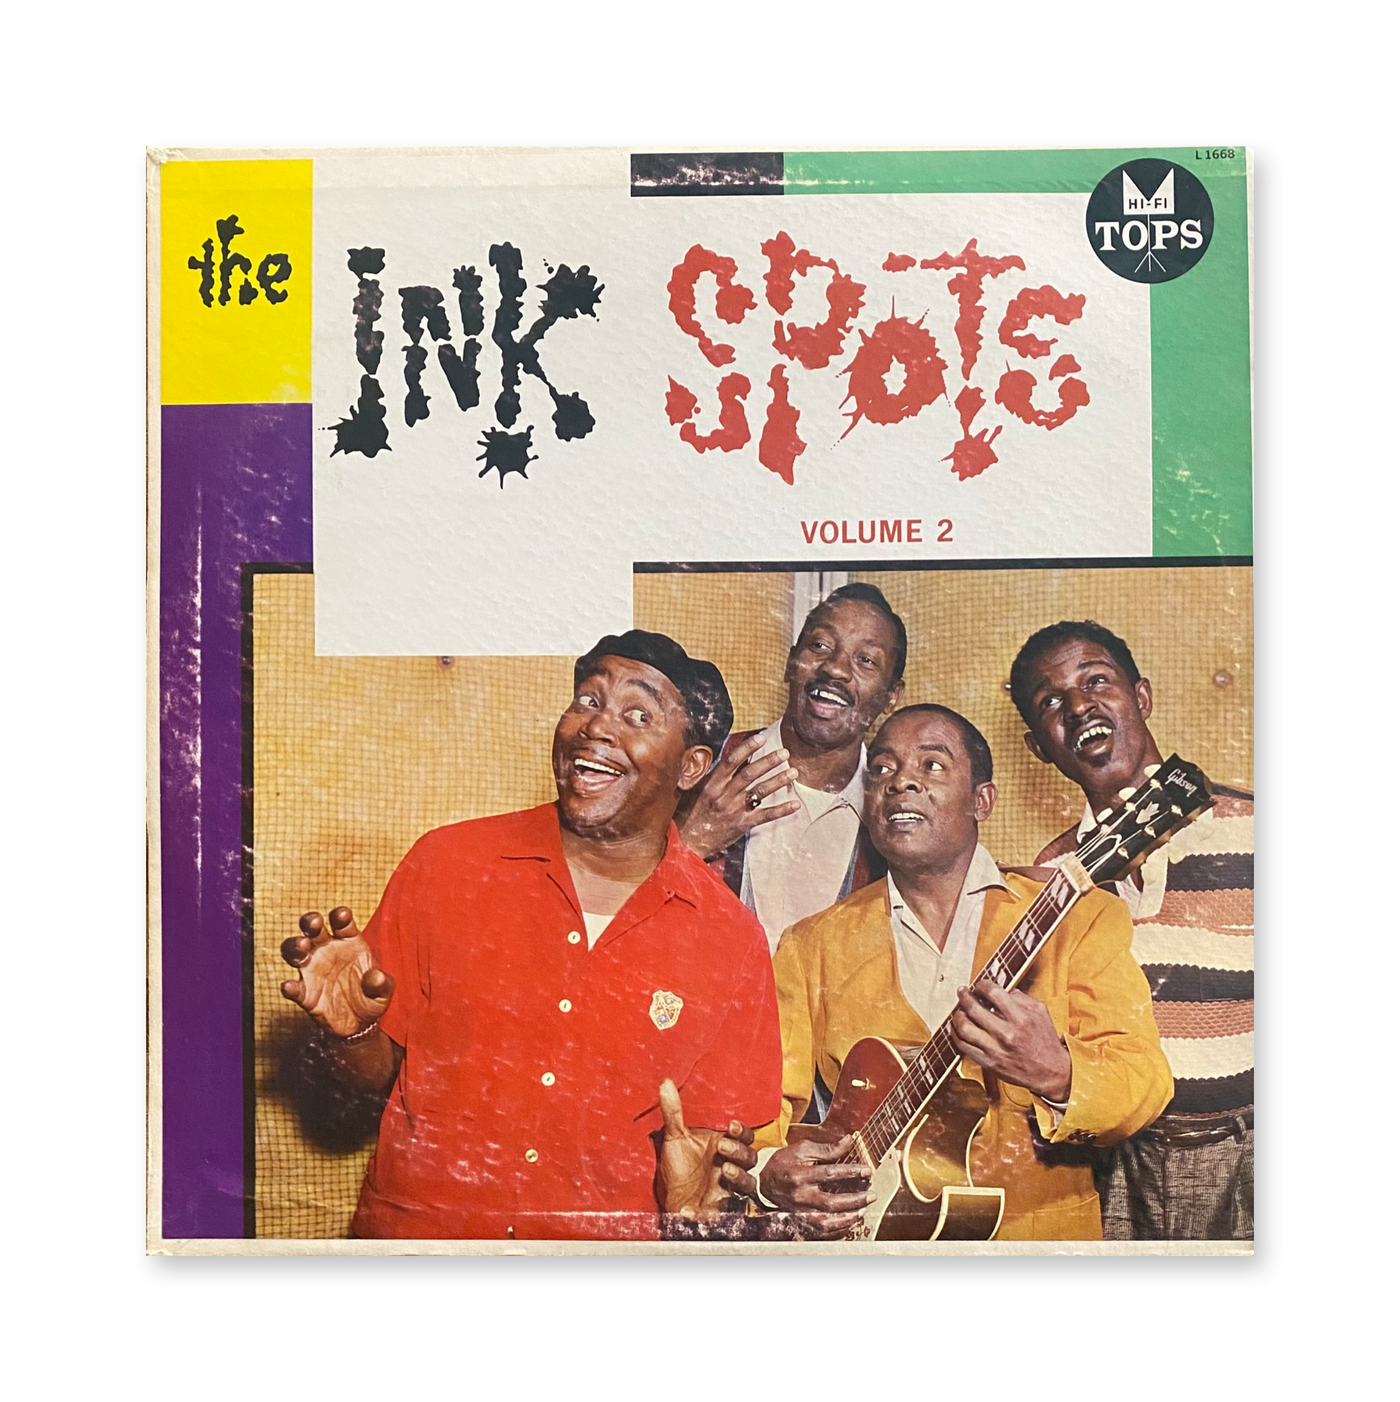 The Ink Spots - Volume 2